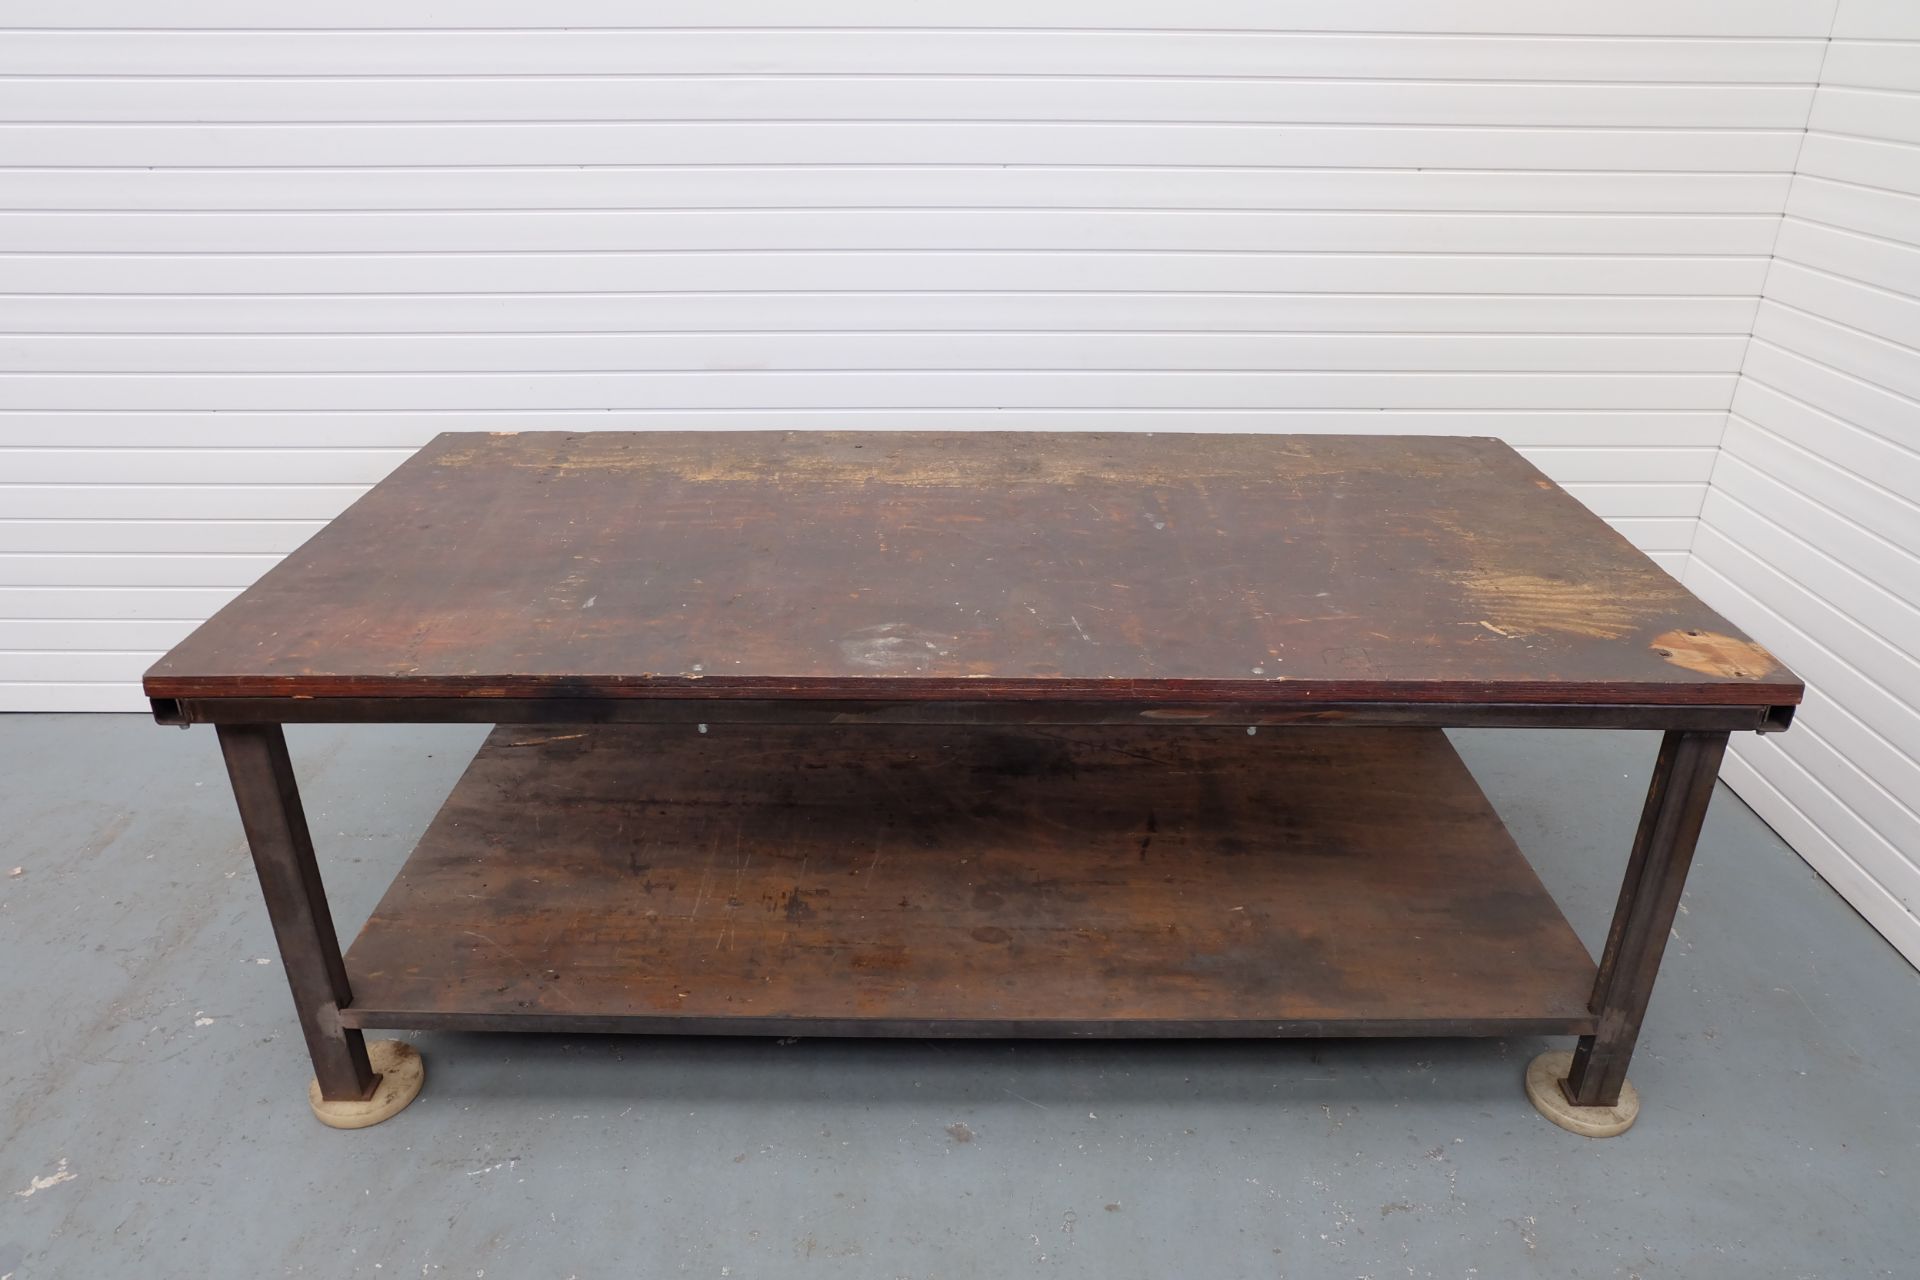 Heavy Duty Work Bench. Steel Frame With 1 1/2" Wooden Top. Size 8' x 4'. Height 35". - Image 2 of 6